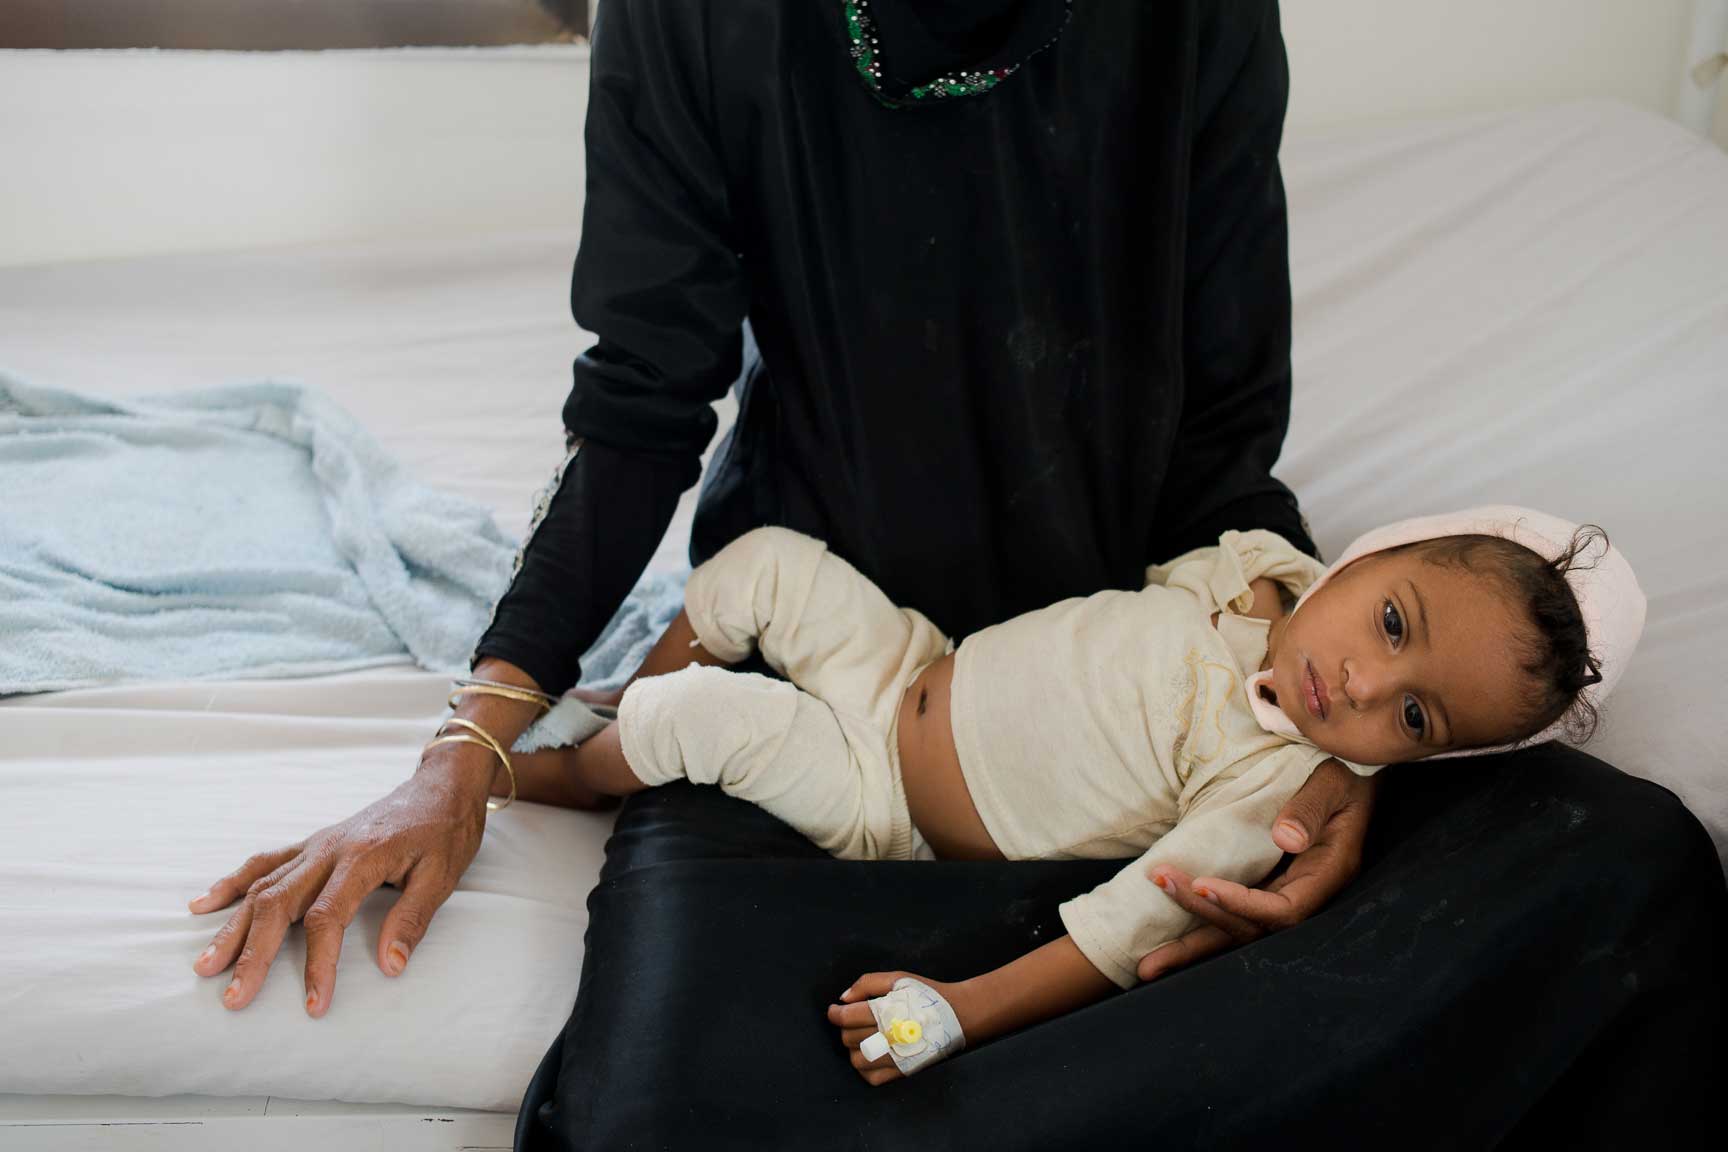 A Yemeni mother holds her malnourished daughter in the children's ward of MSF-supported al Salam Hospital on July 7, 2015 in Amran, Yemen. The mother was too malnourished to breastfeed, and couldn't afford formula or fresh powdered milk. The powder she bought turned out to be spoiled, and her daughter fell ill for weeks.